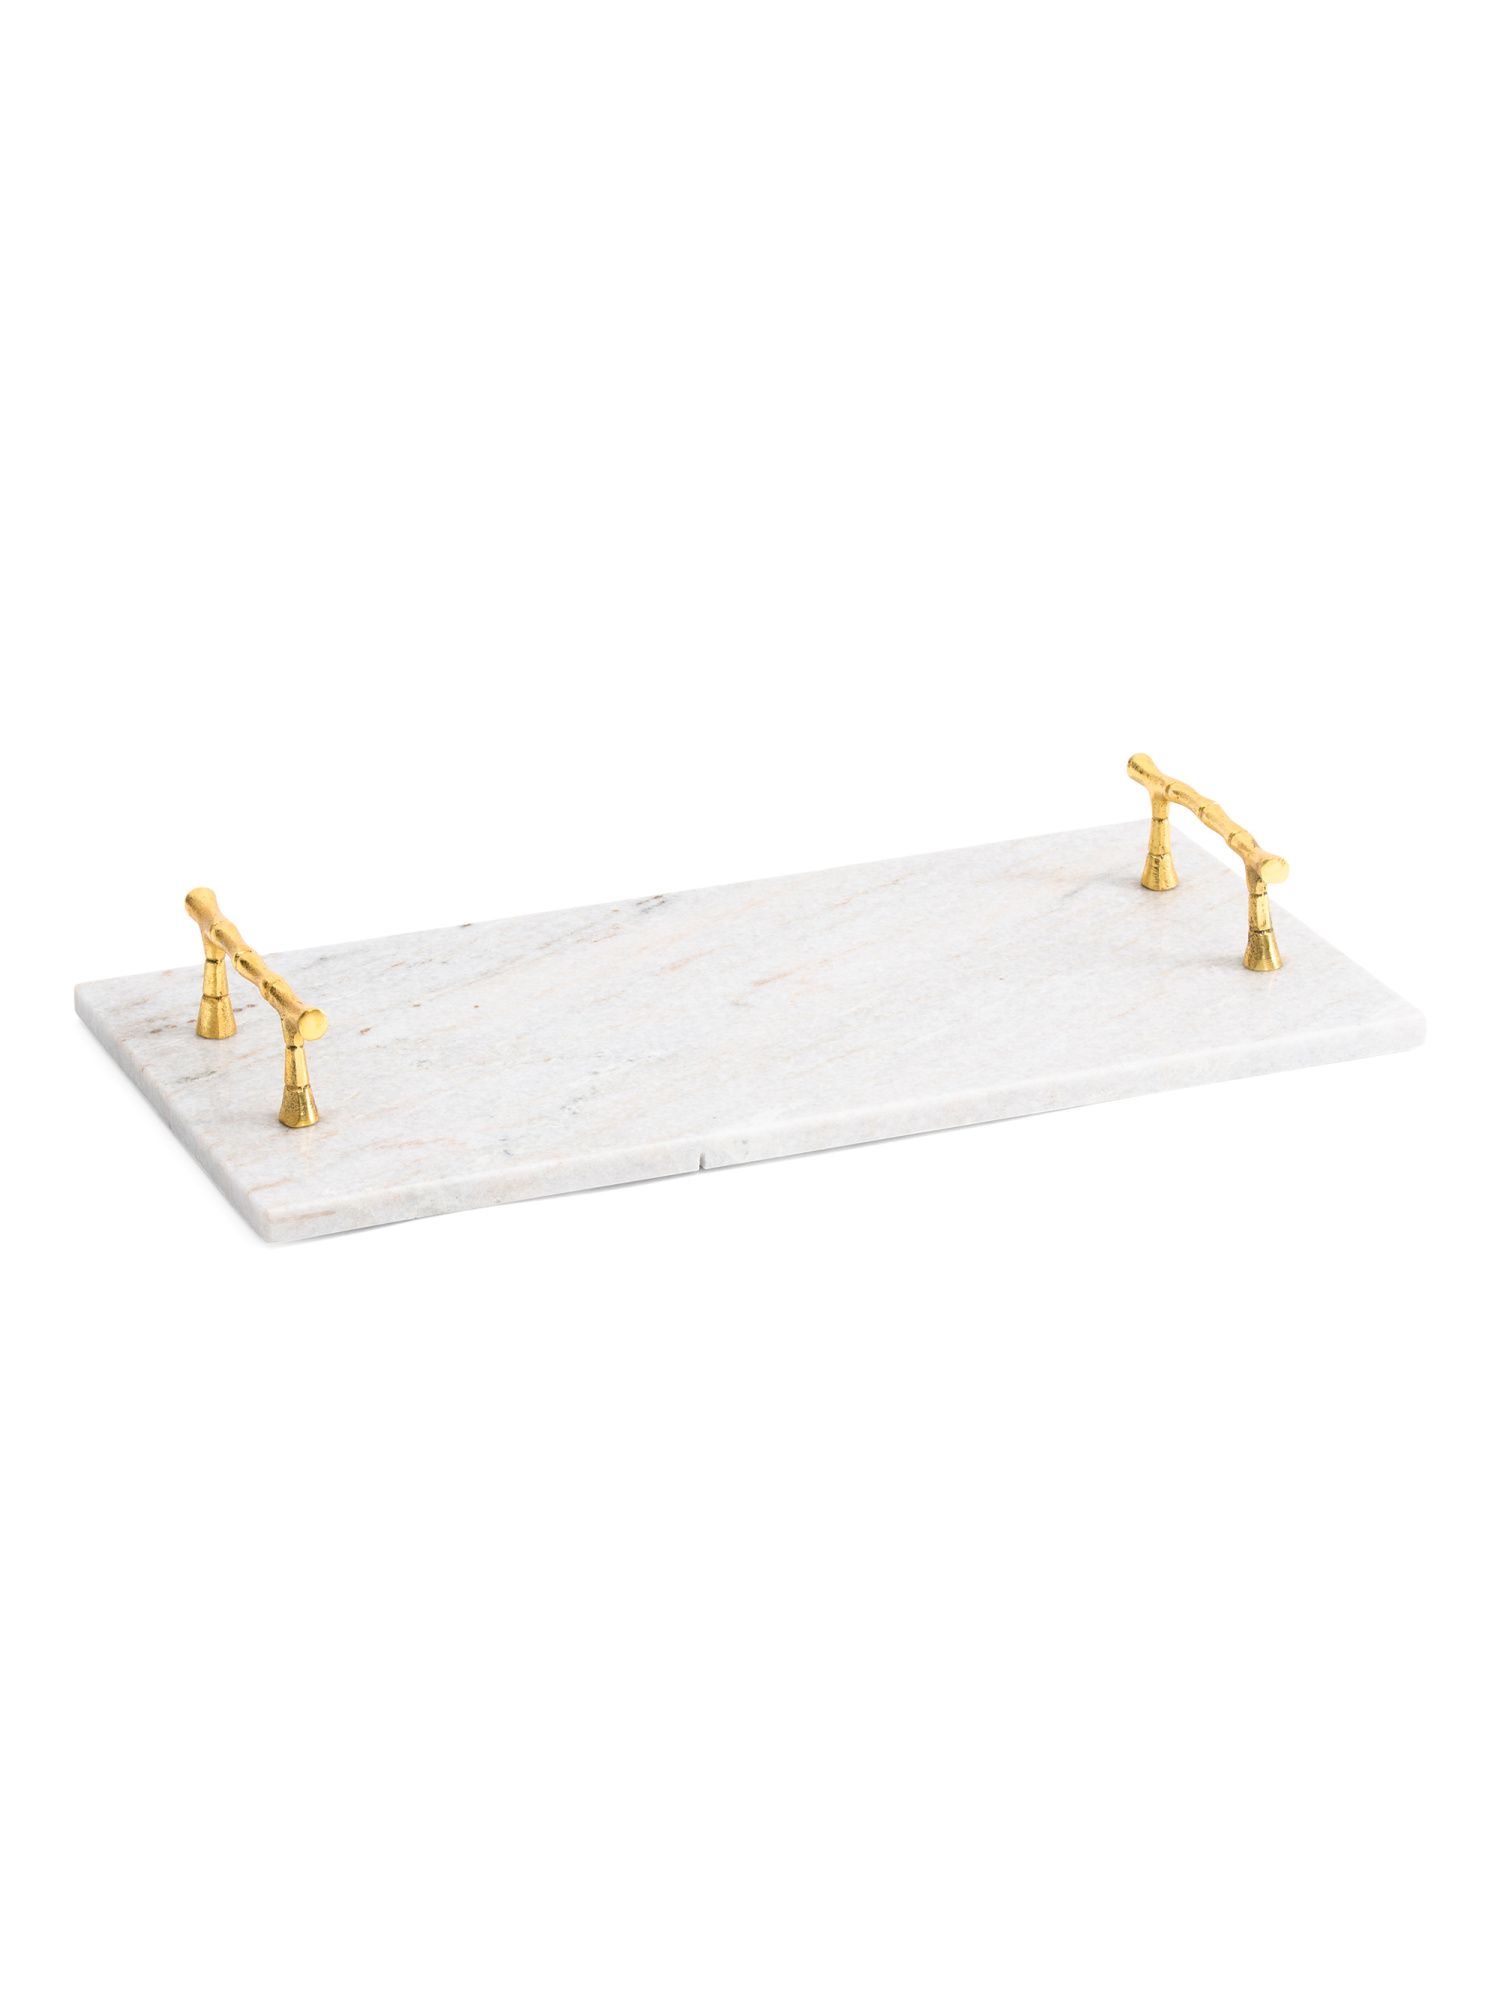 Marble Tray With Brass Handles | Marshalls